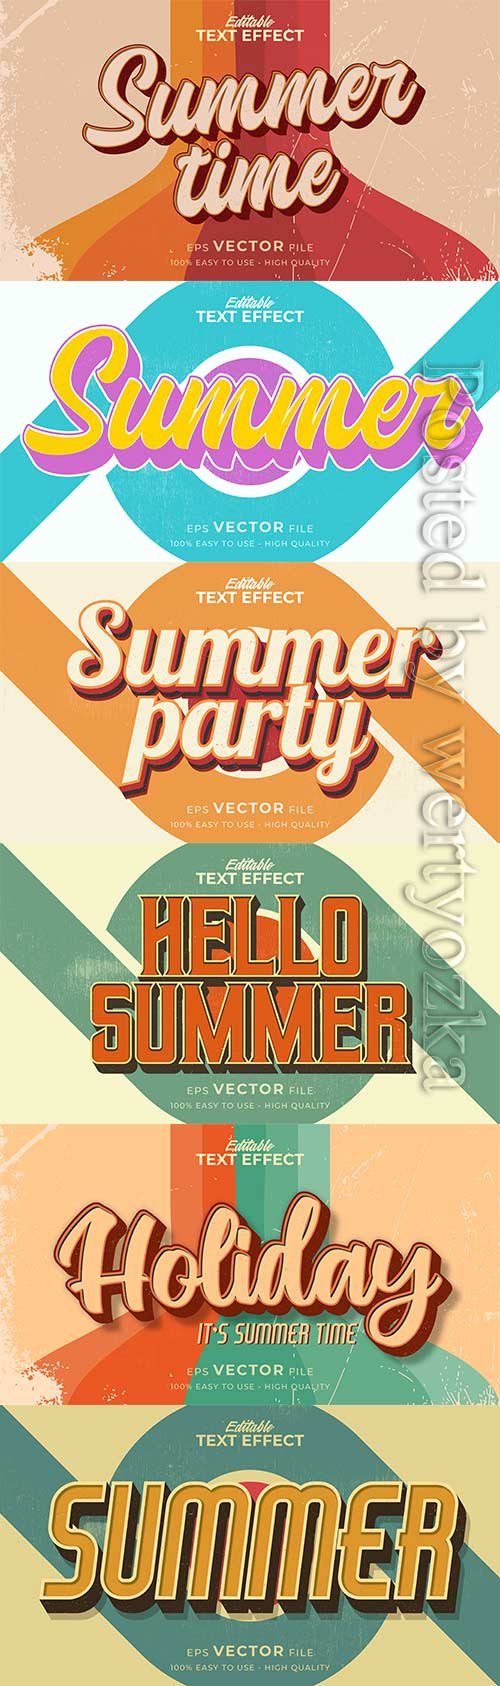 Retro summer holiday text in grunge style theme in vector vol 7